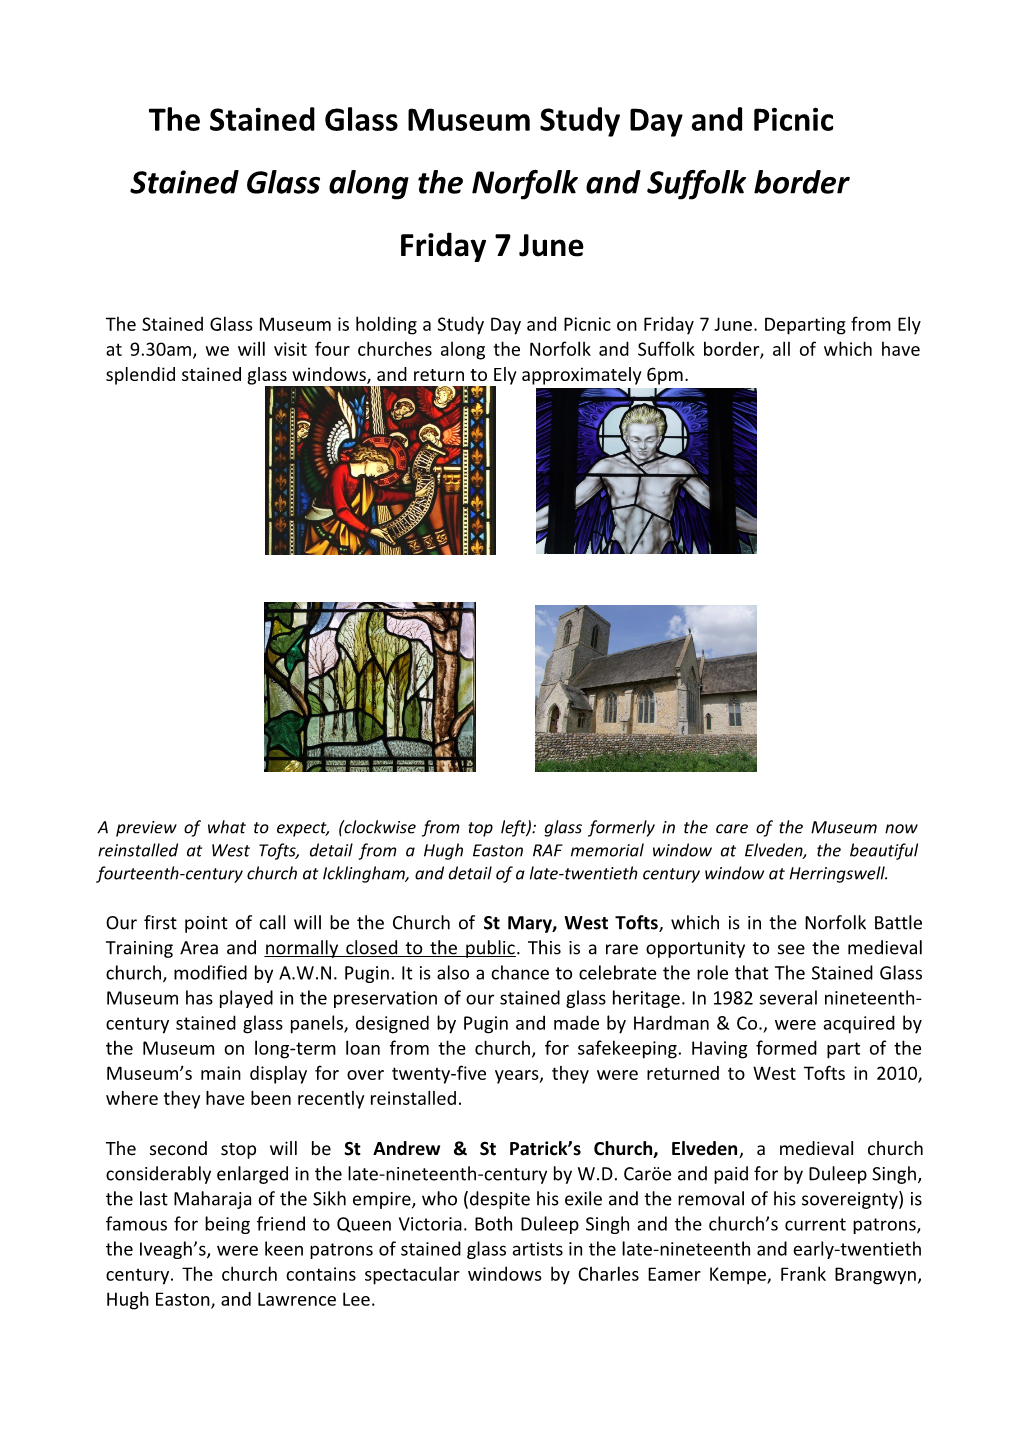 The Stained Glass Museum Study Day and Picnic